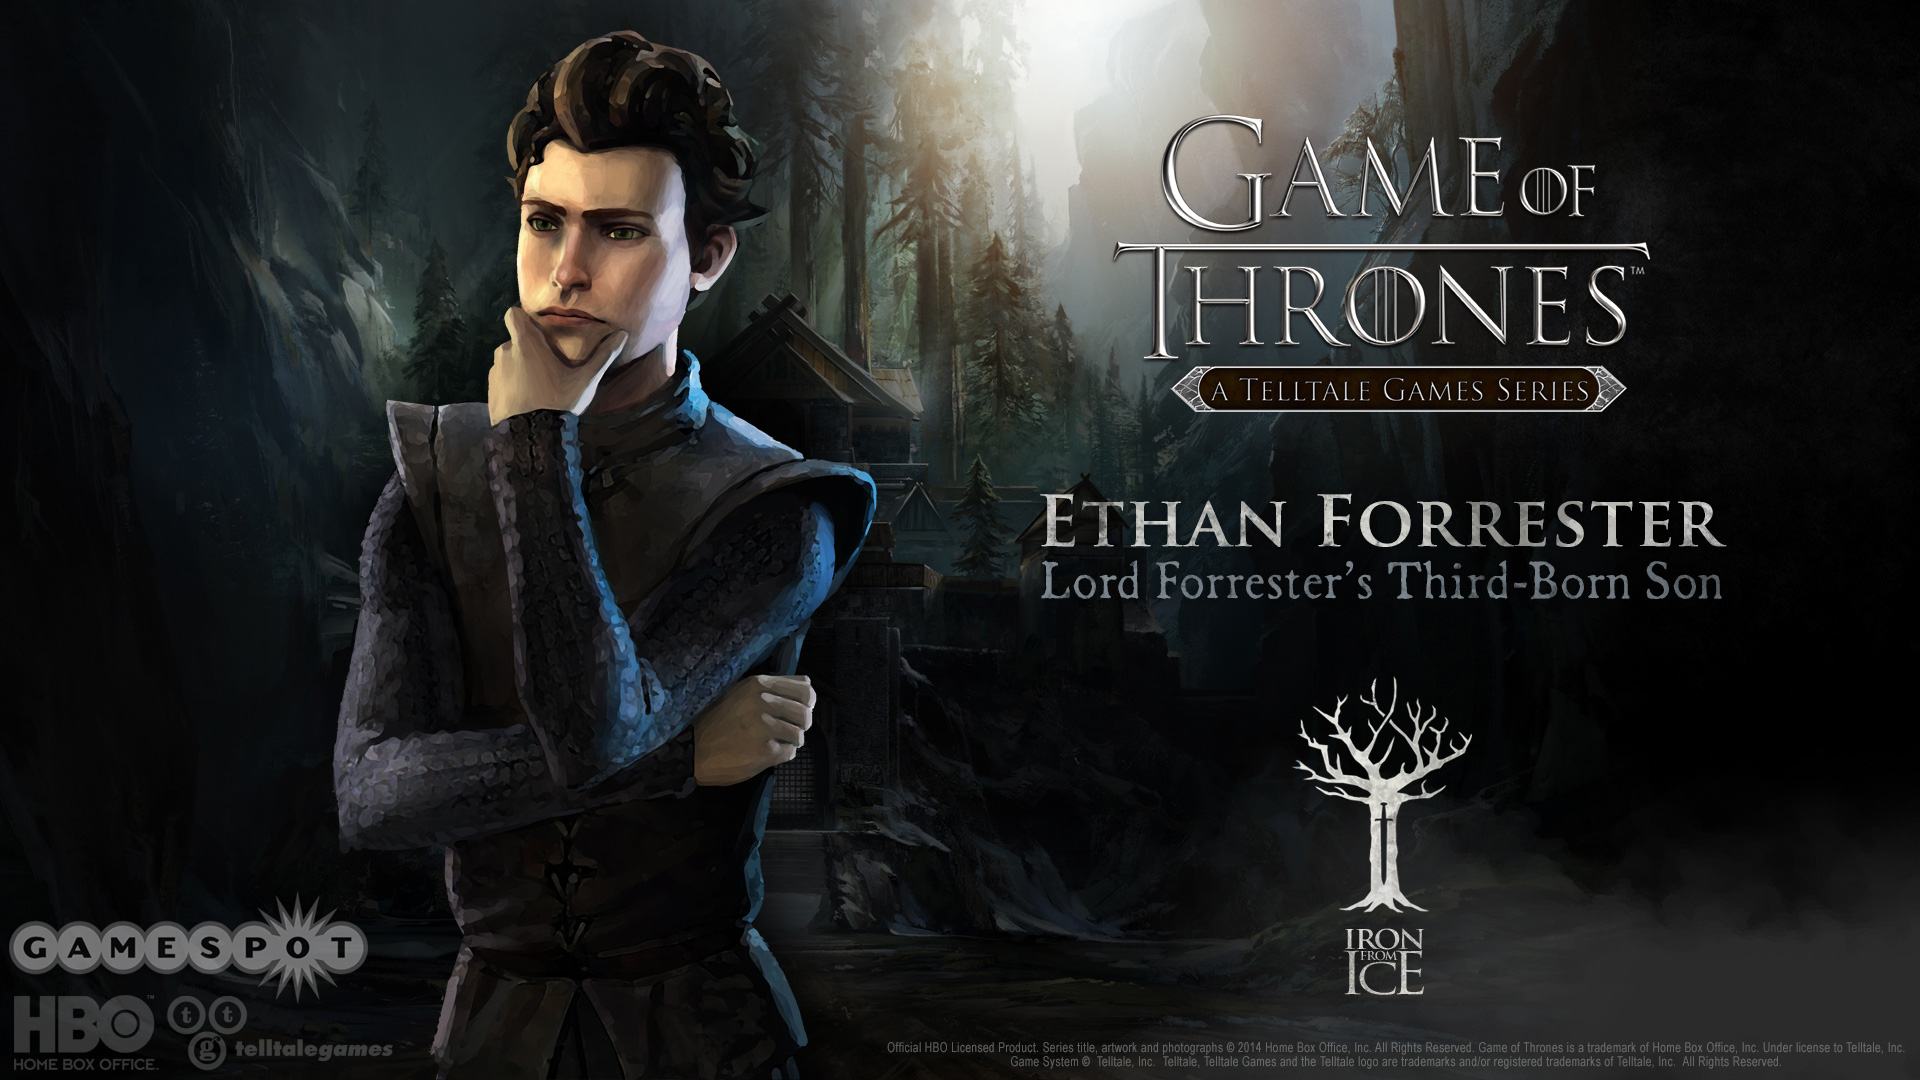 Game Of Thrones - A Telltale Games Series Backgrounds, Compatible - PC, Mobile, Gadgets| 1920x1080 px